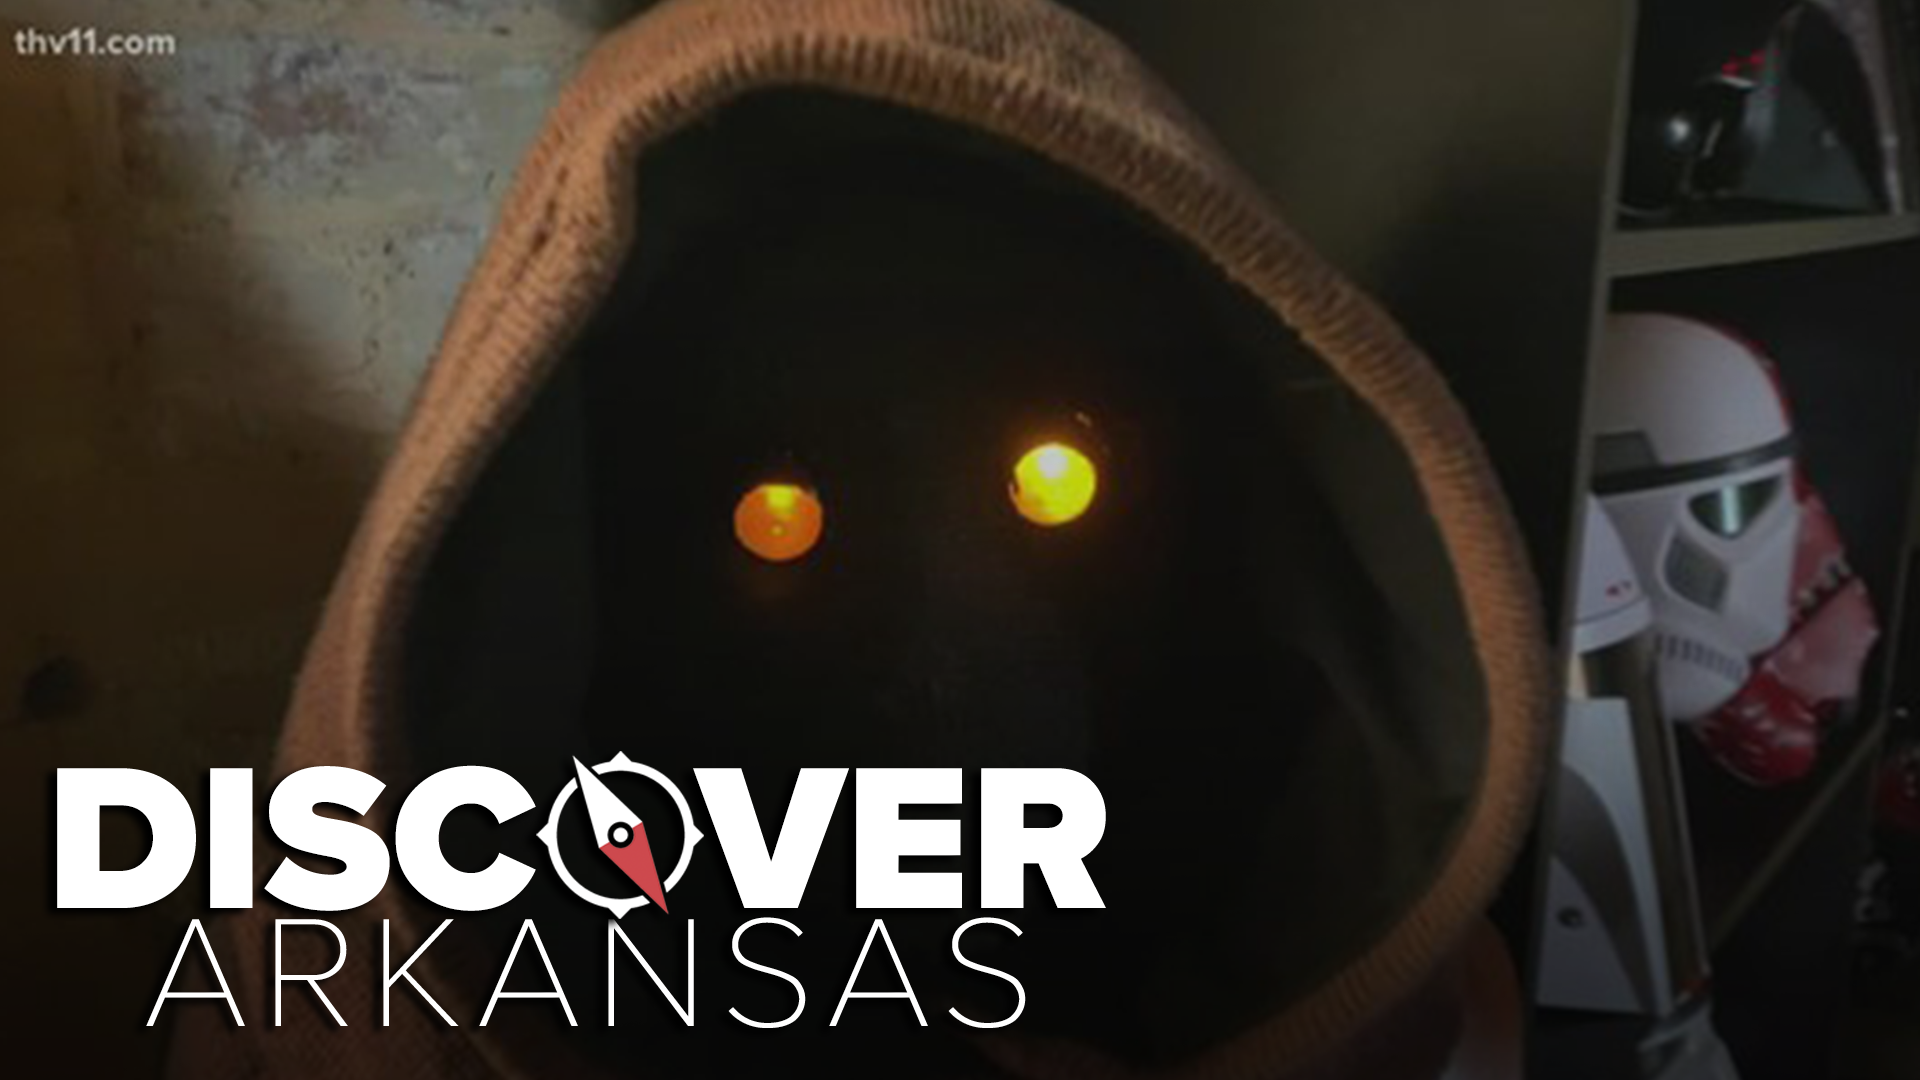 Discover Arkansas takes a step back in time, where you can re-live your childhood and play with superheroes!